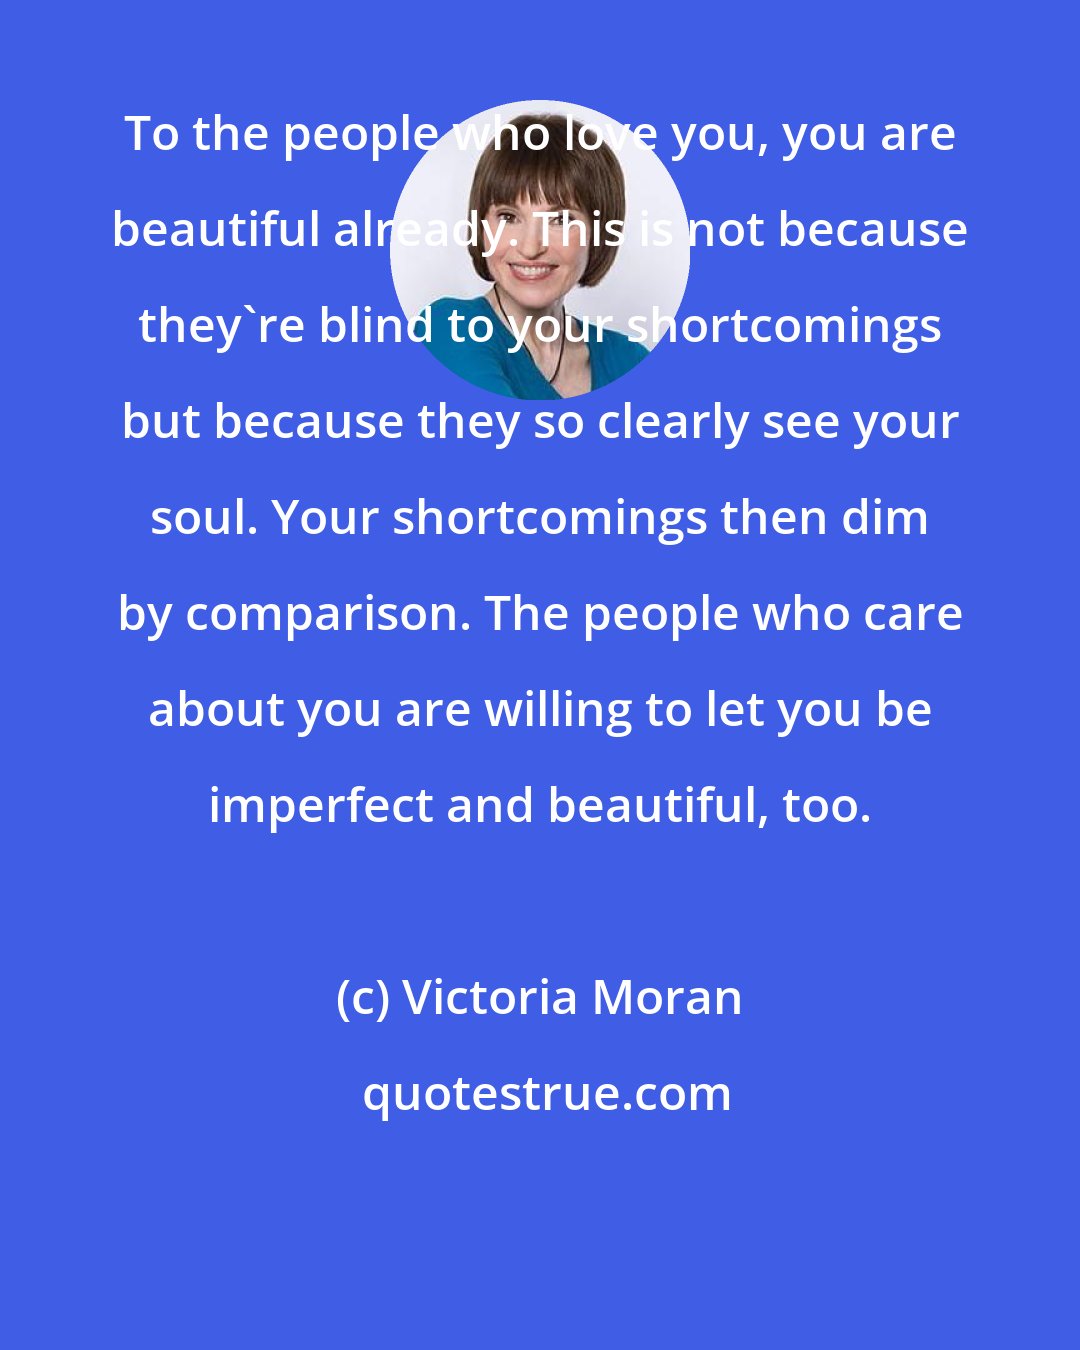 Victoria Moran: To the people who love you, you are beautiful already. This is not because they're blind to your shortcomings but because they so clearly see your soul. Your shortcomings then dim by comparison. The people who care about you are willing to let you be imperfect and beautiful, too.